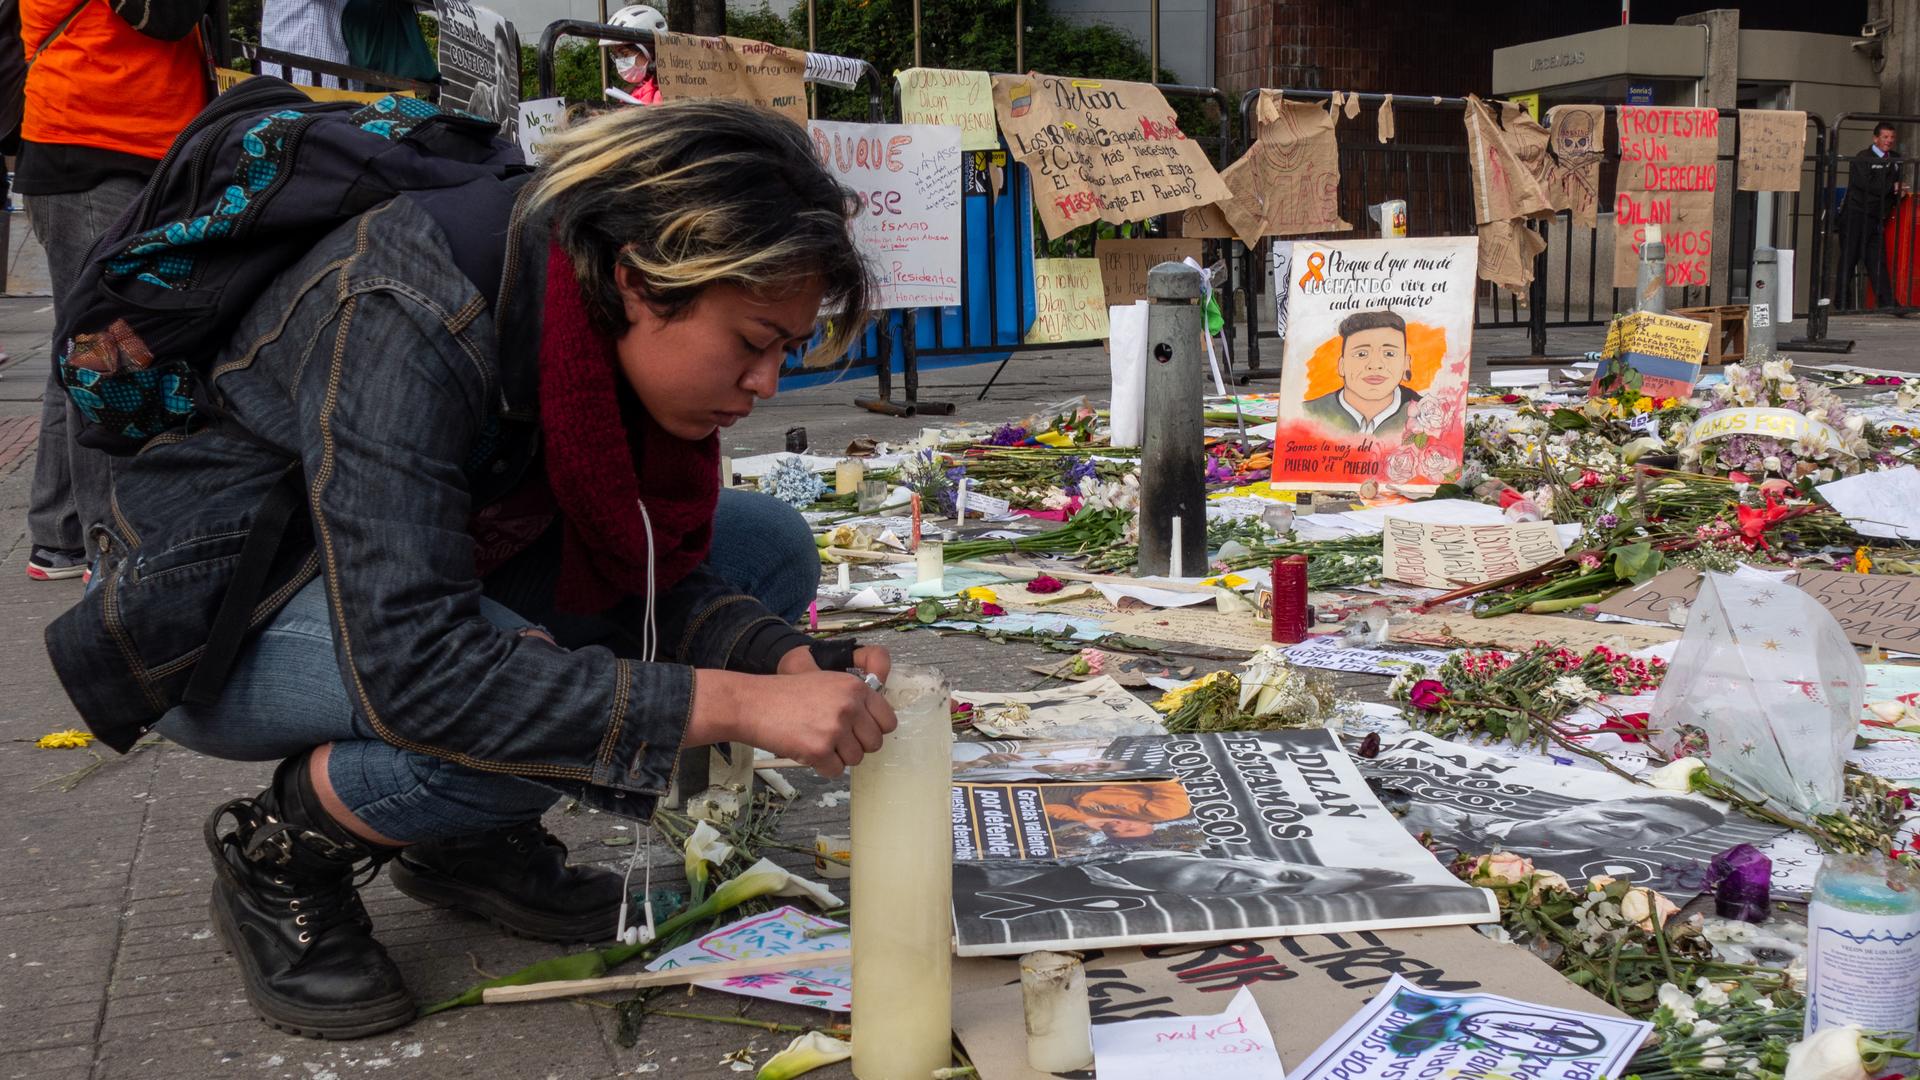 A student leans over a candle at a memorial with lots of photos and paintings 